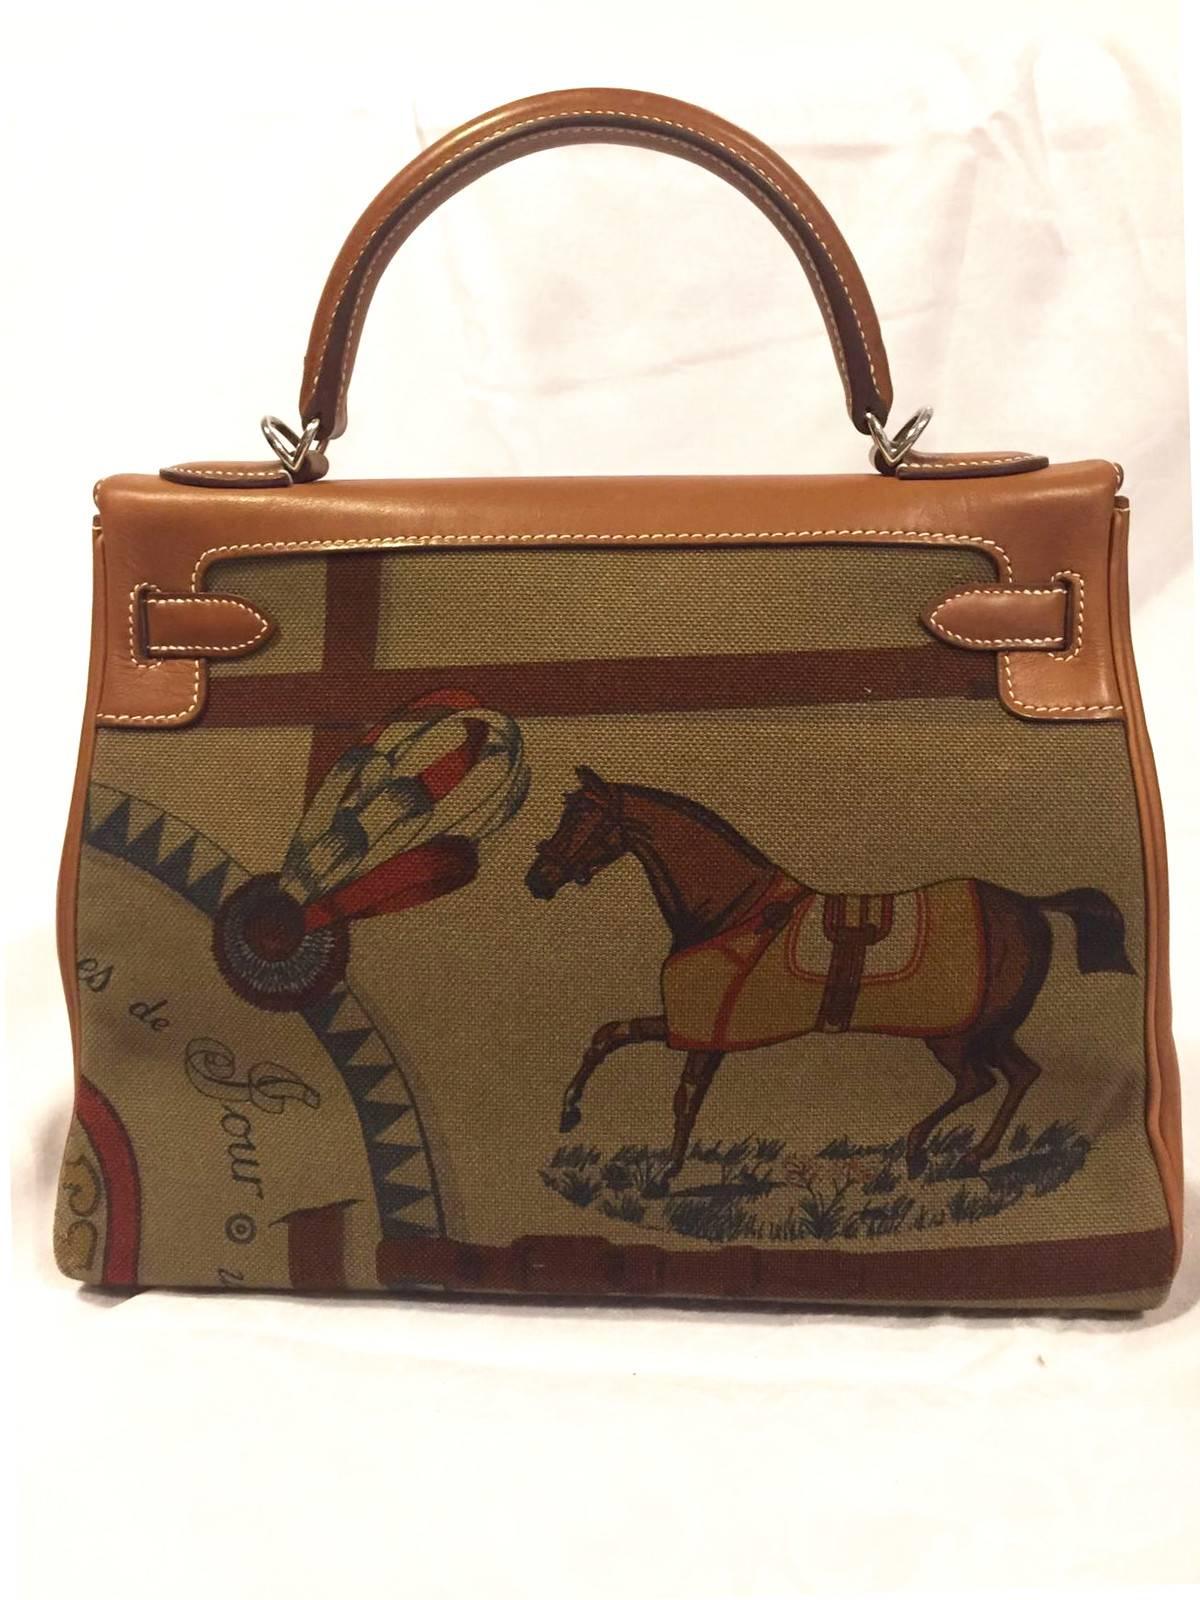 Beautiful Authentic Hermes Bag

Super Rare, Special Edition !

"KELLY"

Made in France

Stamp N in a square (2010)

Made of Barenia Leather, Canvas (toile) and Palladium Plated Hardware (Silver-tone)

Shoulder strap is made of Leather and